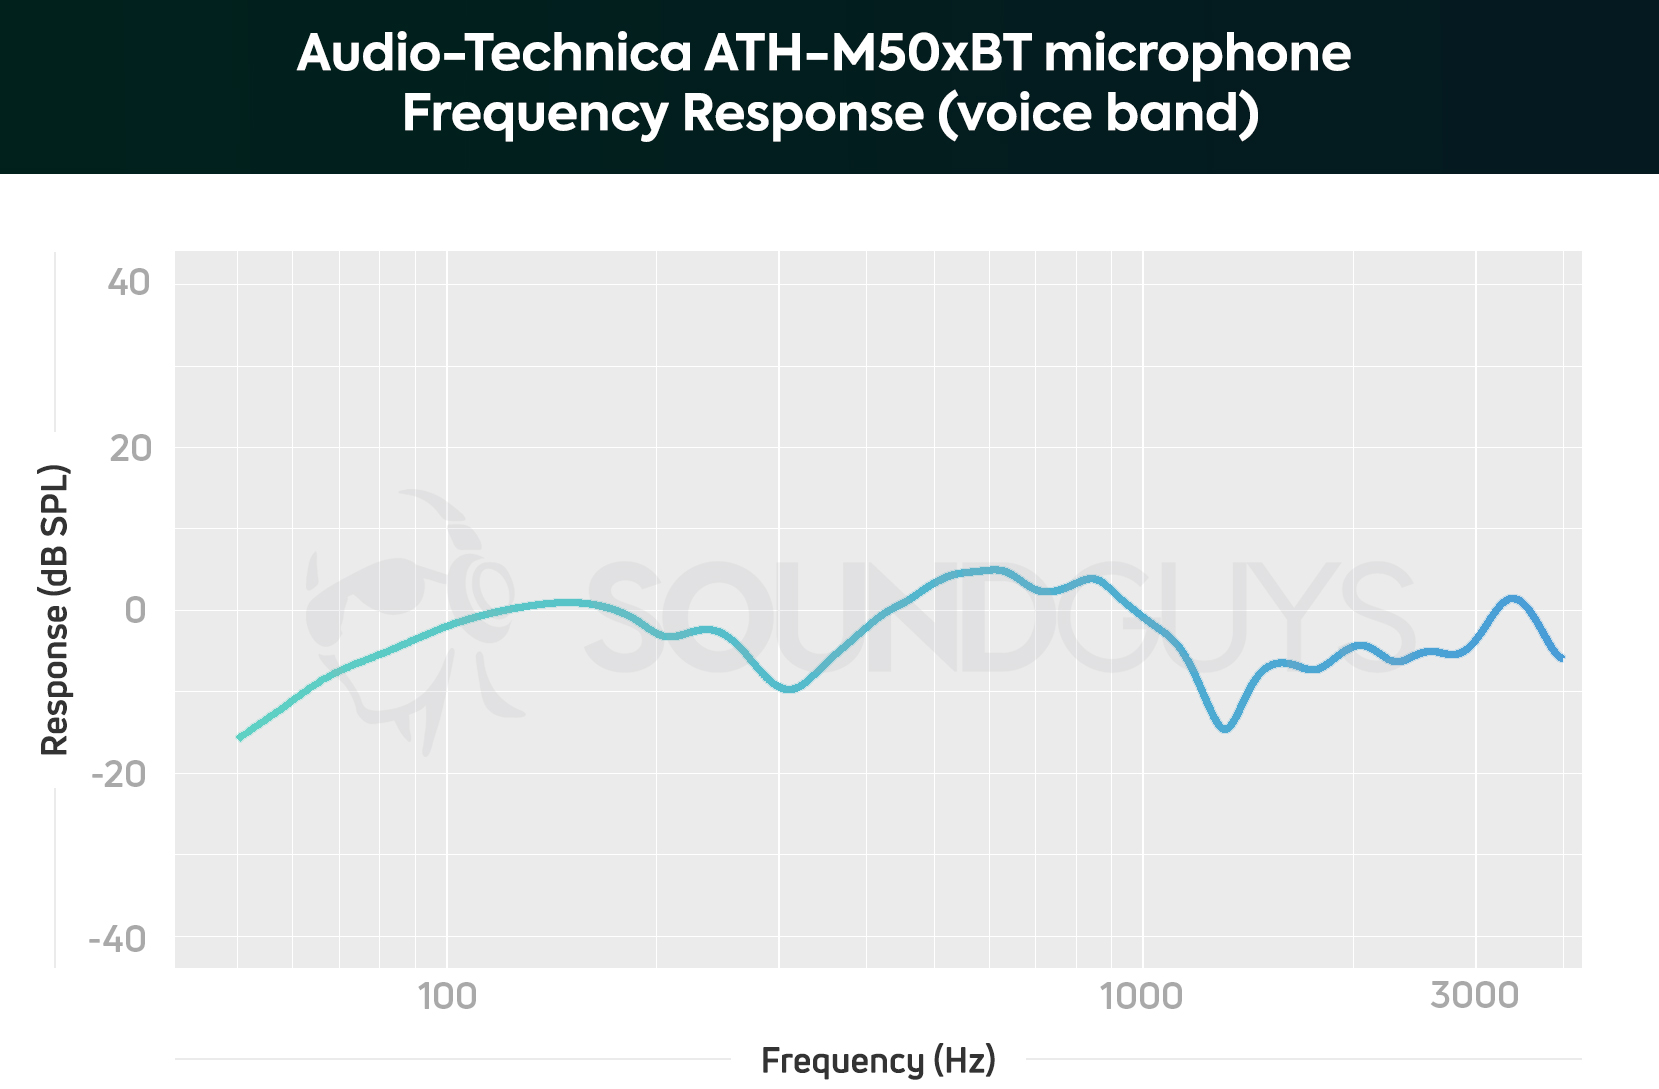 Audio-Technica ATH-M50xBT microphone chart limited to the human voice band.